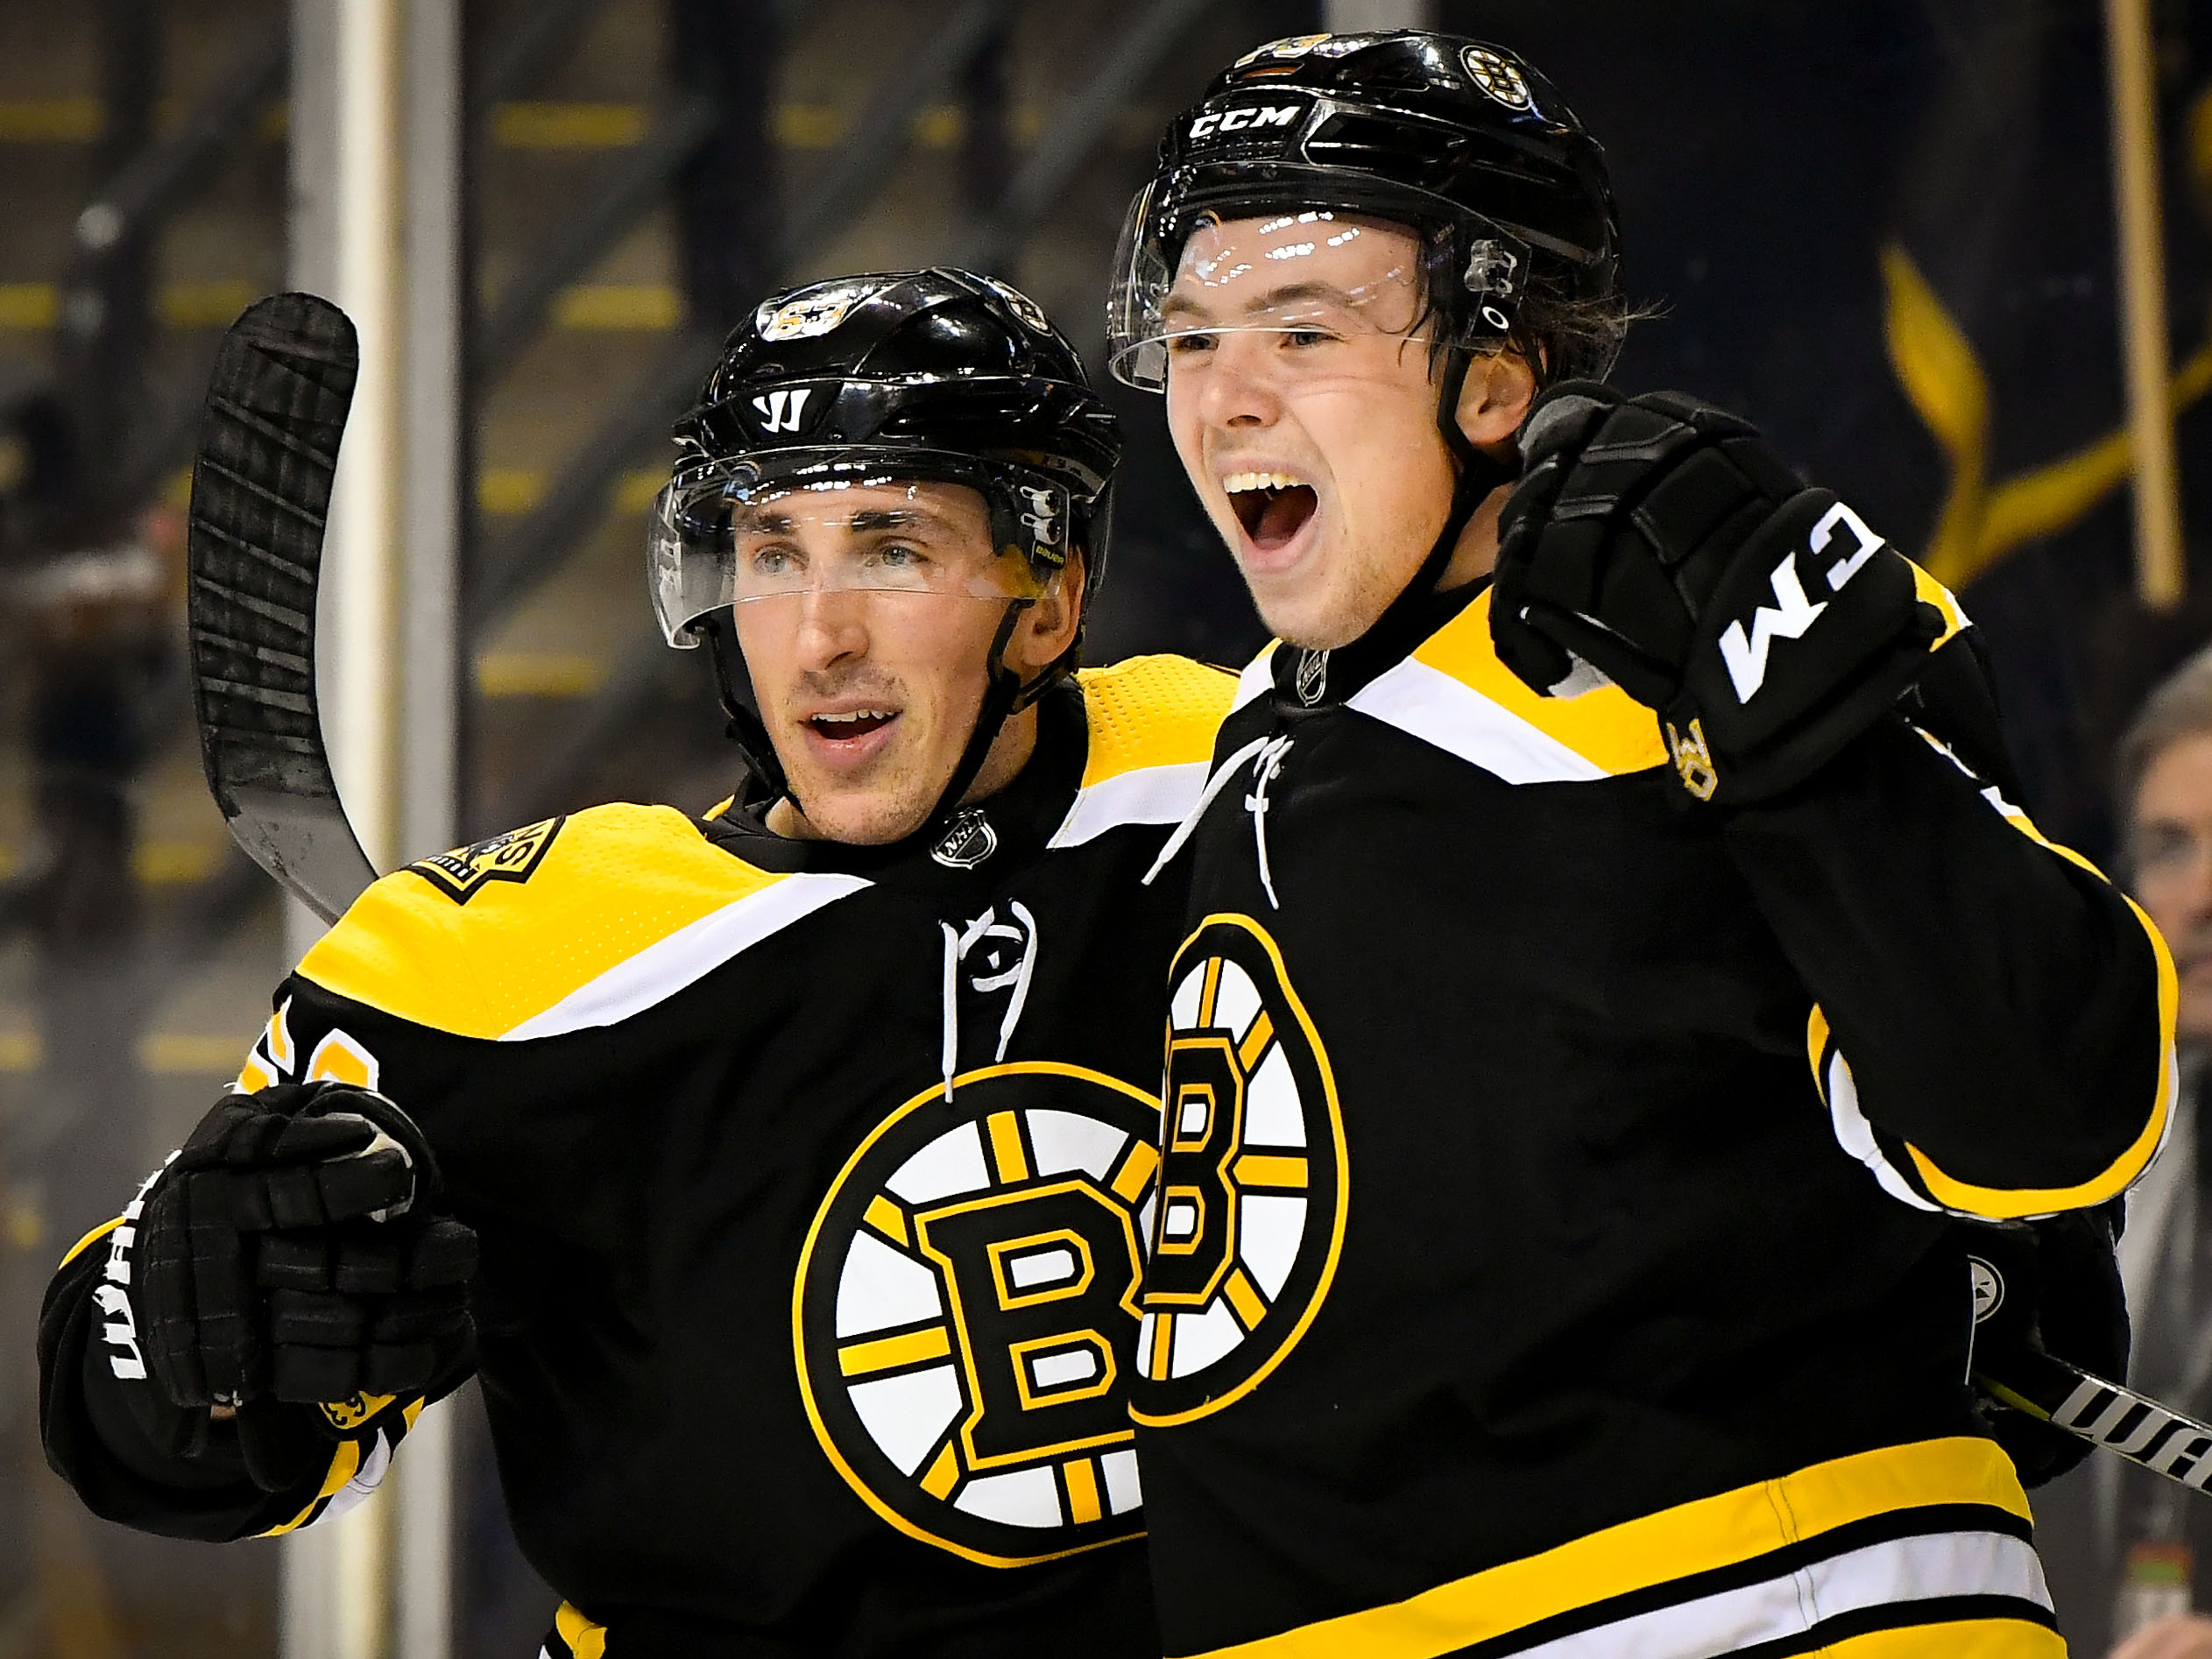 New-Look Bruins Complete Comeback, Secure Victory Over Hurricanes